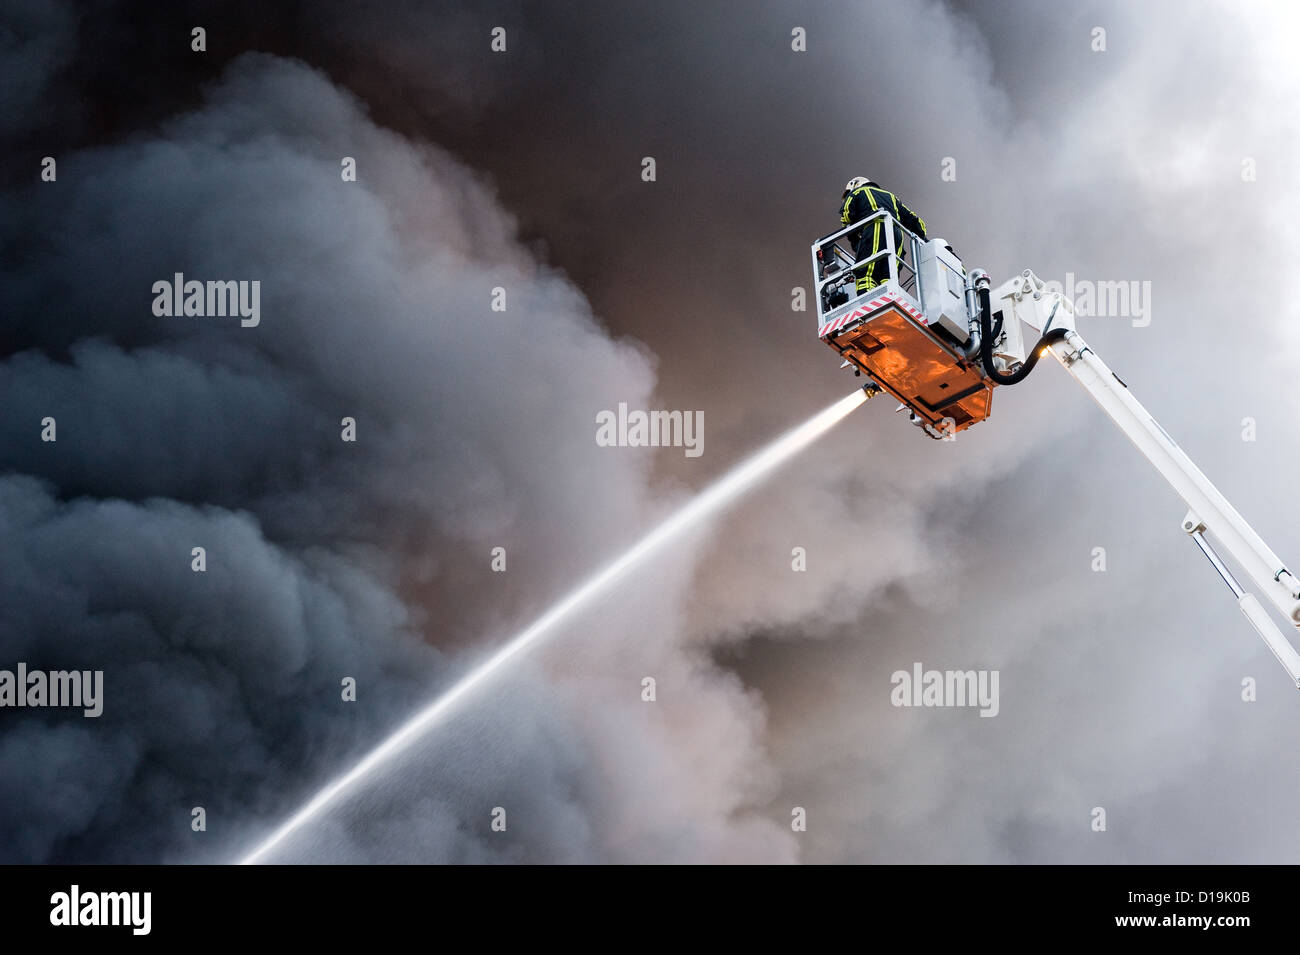 A fire fighter at work in a hydraulic hoist Stock Photo